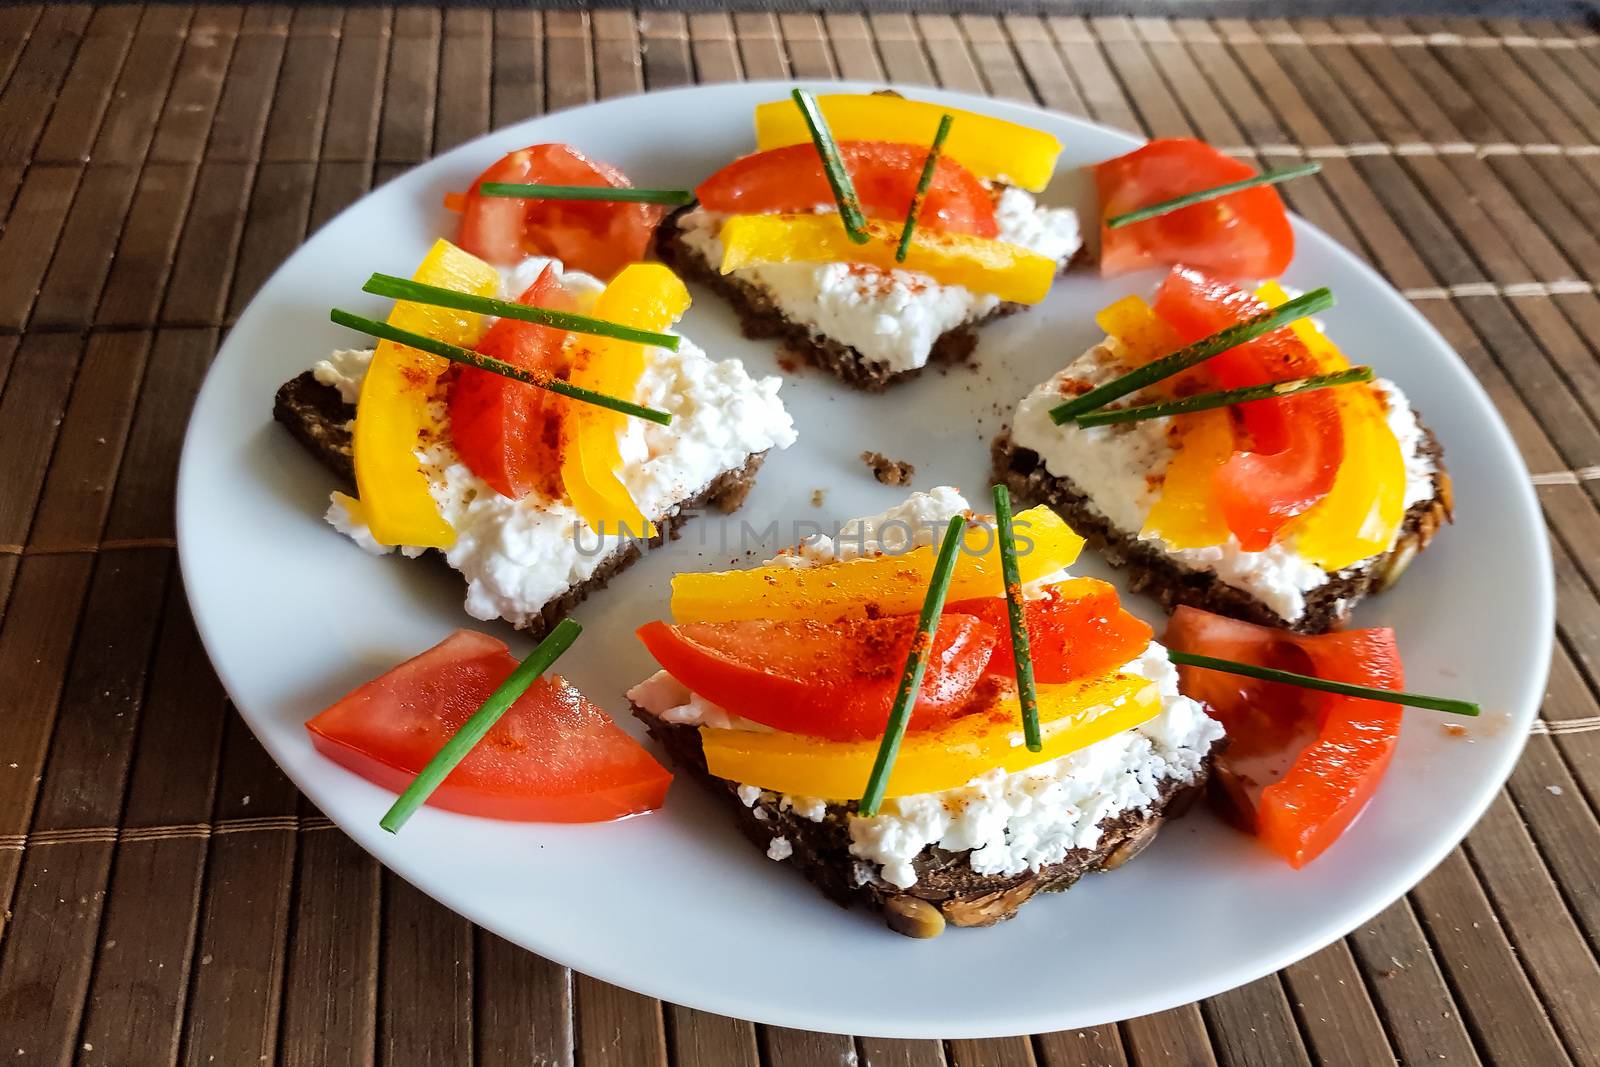 Black bread with cottage cheese and vegetables. by JFsPic